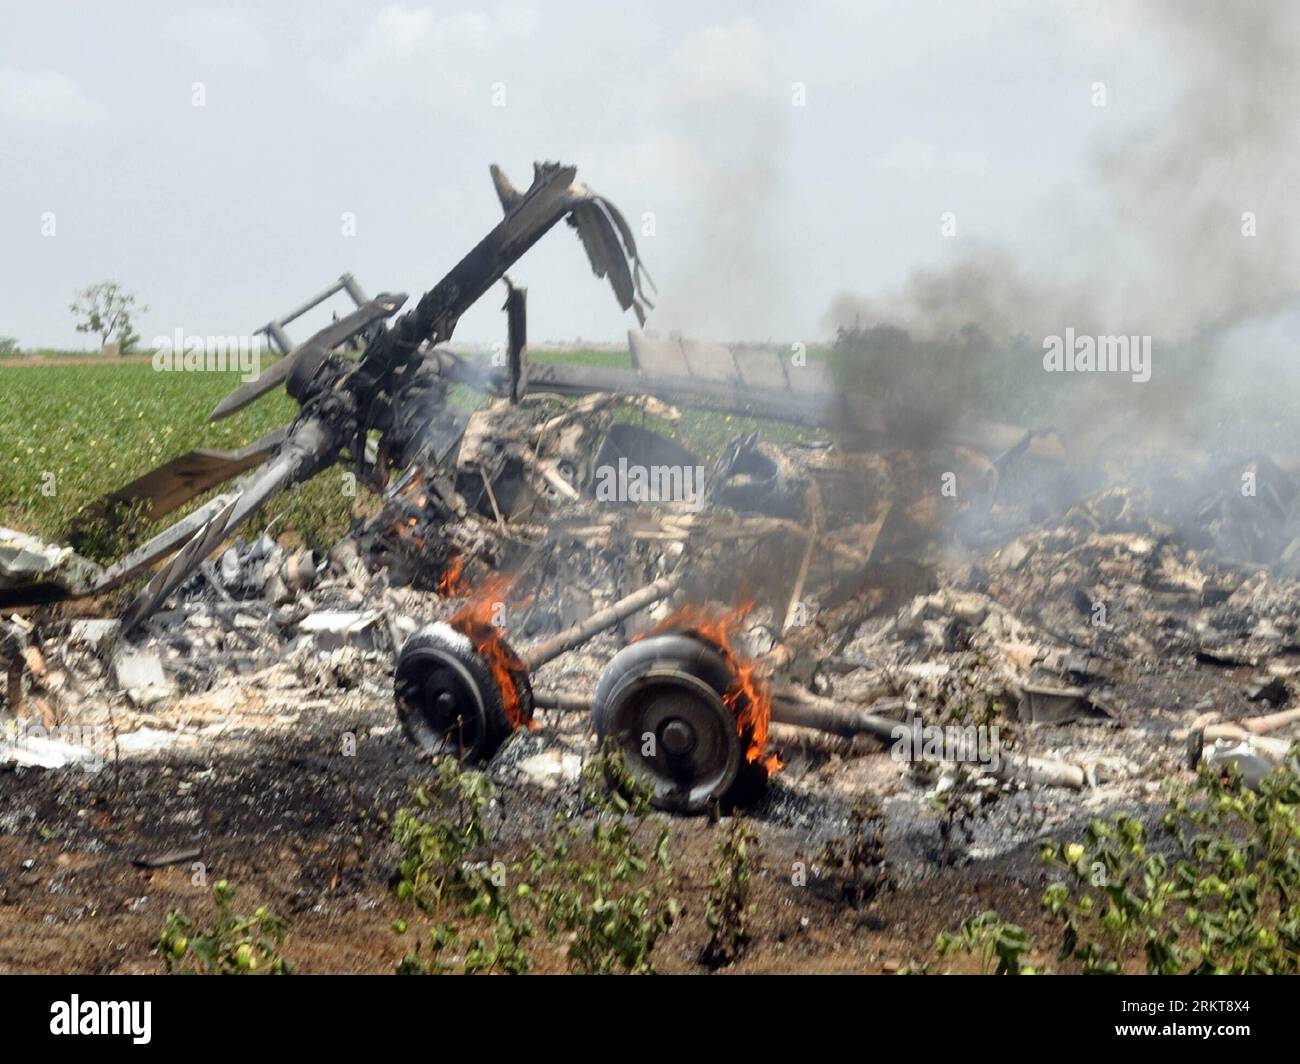 Bildnummer: 58406491  Datum: 30.08.2012  Copyright: imago/Xinhua (120830) -- JAMNAGAR (INDIA), Aug. 30, 2012 (Xinhua) -- A damaged MI-17 helicopter is seen following the collision accident near Sarmath village in Jamnagar district of Gujarat, India, Aug. 30, 2012. At least eight Indian Air Force (IAF) personnel were killed when two MI-17 IAF helicopters collided mid-air on Thursday. (Xinhua/Stringer) INDIA-GUJARAT-HELICOPTER-CRASH PUBLICATIONxNOTxINxCHN Gesellschaft Unfall Schäden Absturz Hubschrauber Hubschrauberabsturz xmb x0x 2012 quer      58406491 Date 30 08 2012 Copyright Imago XINHUA Stock Photo